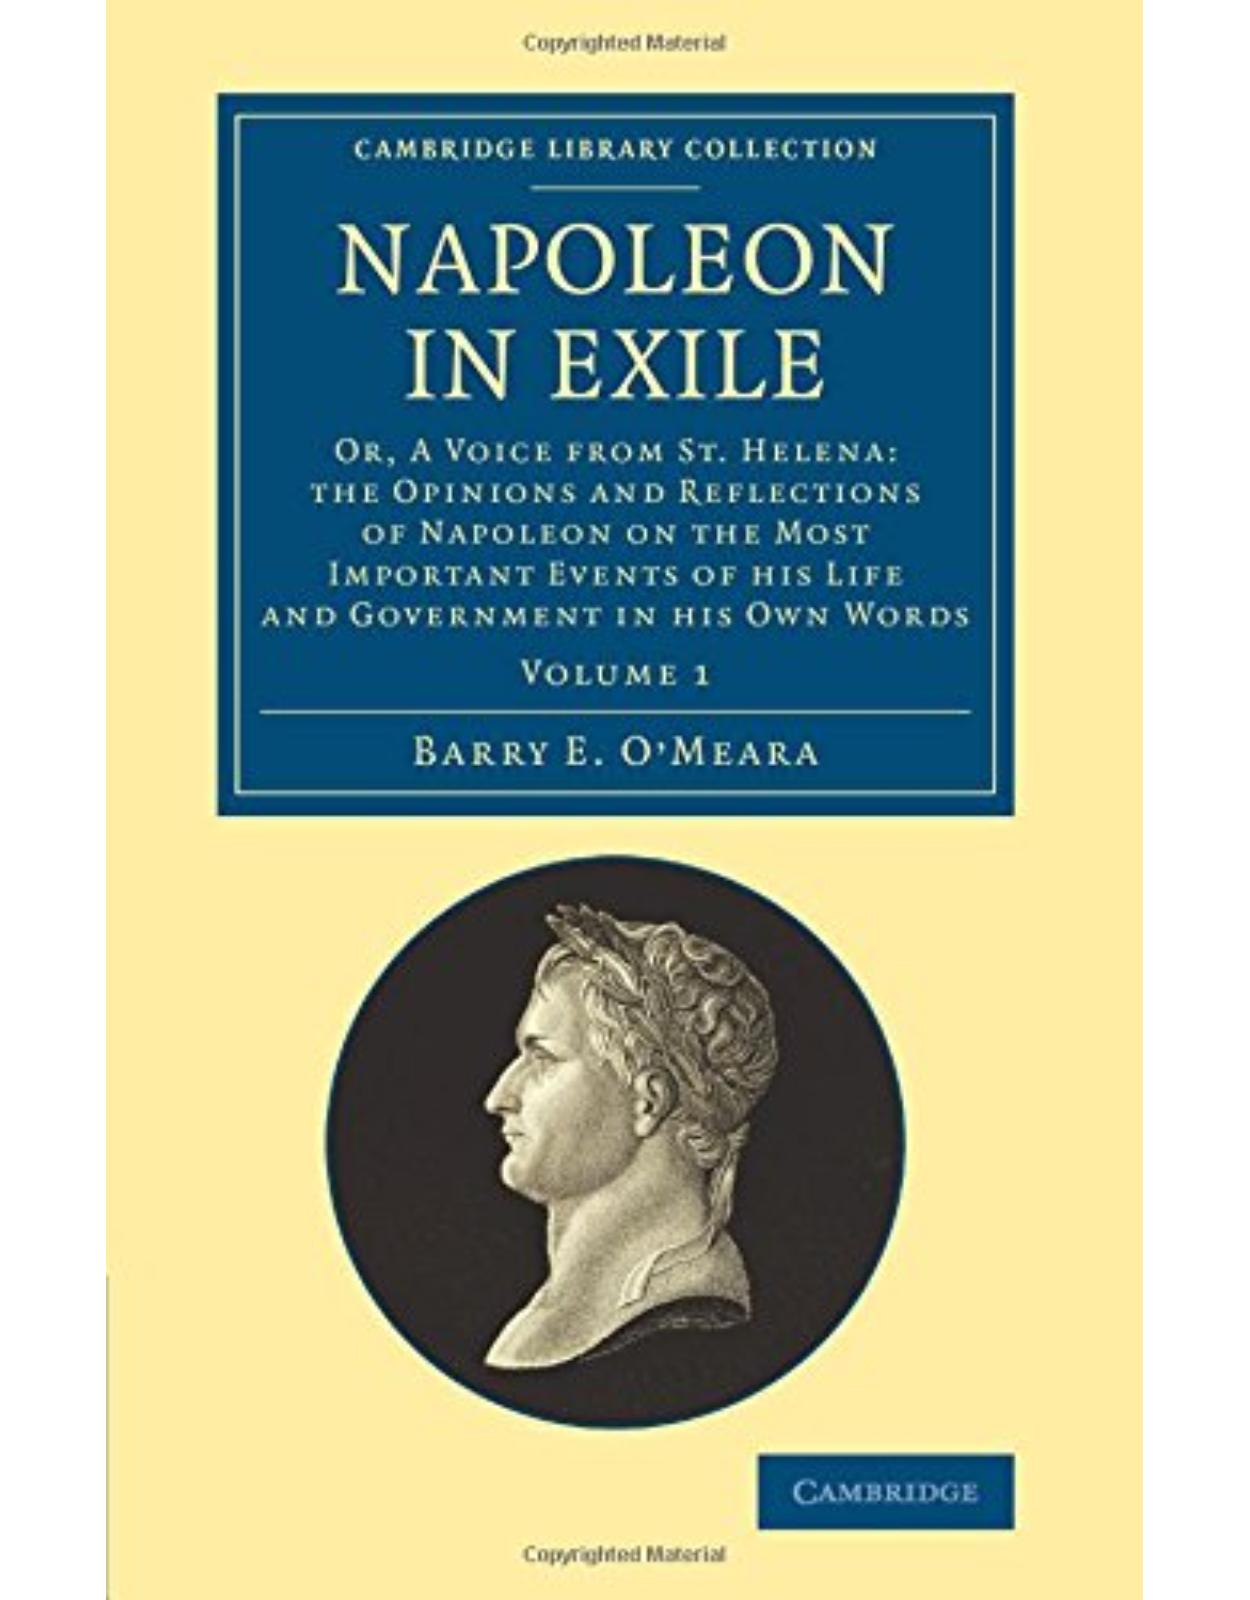 Napoleon in Exile 2 Volume Set: Napoleon in Exile: Or, A Voice from St. Helena: The Opinions and Reflections of Napoleon on the Most Important Events ... Collection - Naval and Military History)